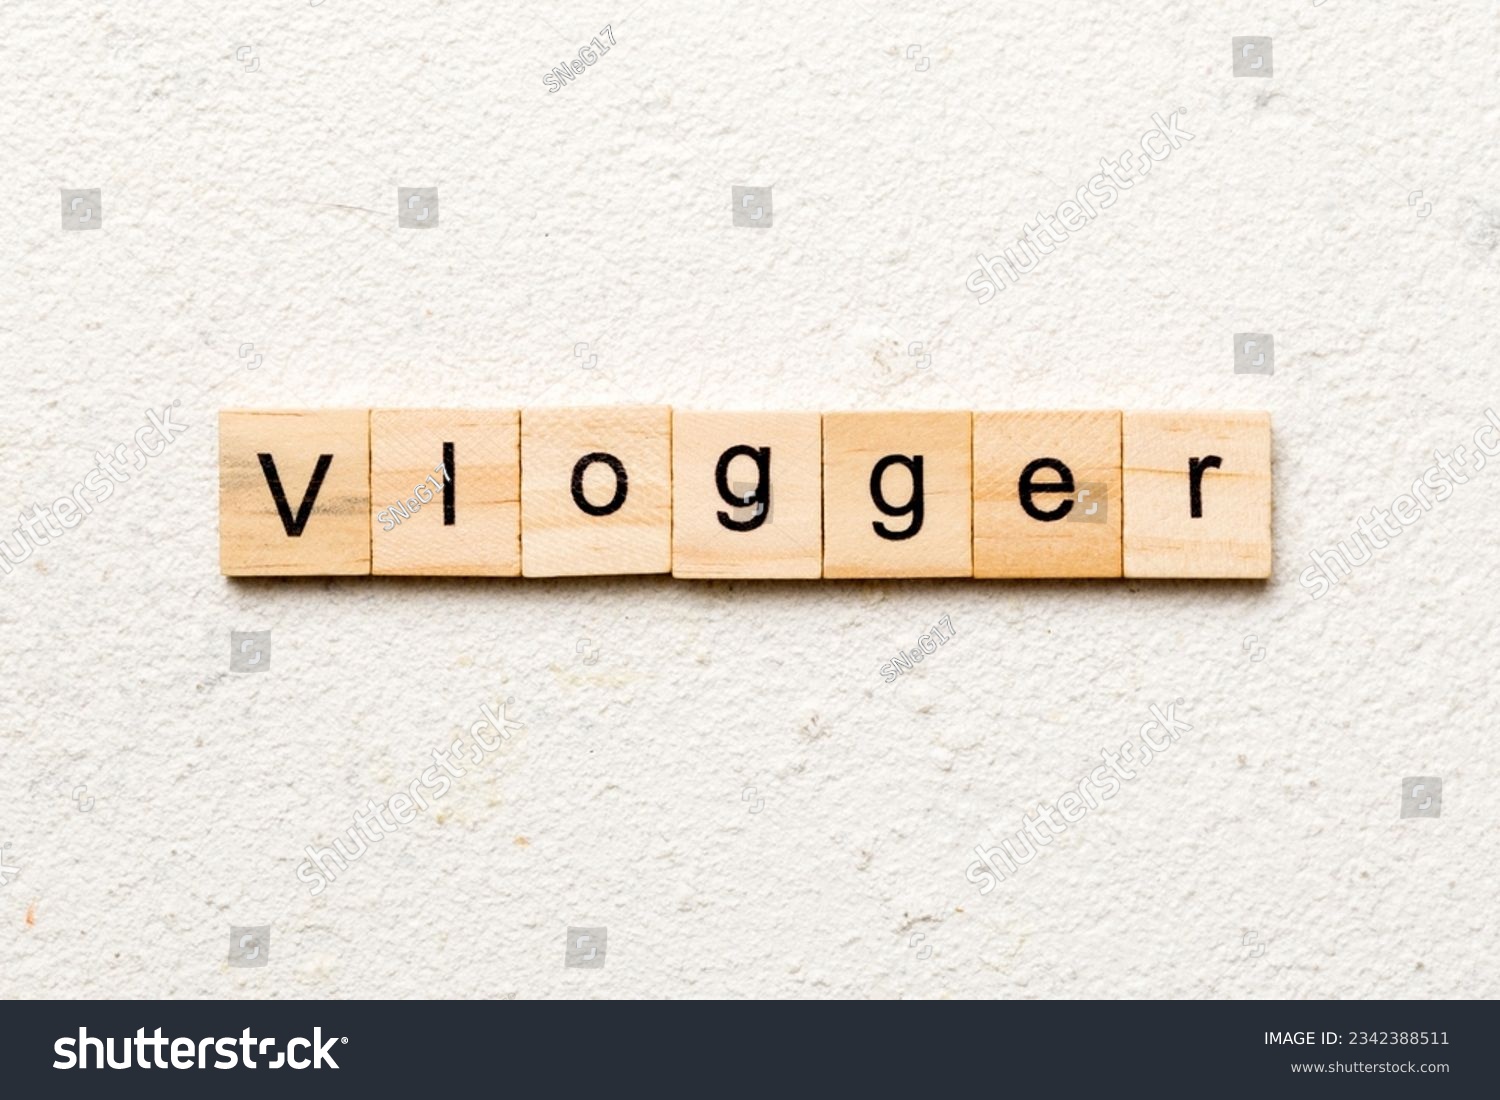 vlogger word written on wood block. vlogger text on table, concept. #2342388511